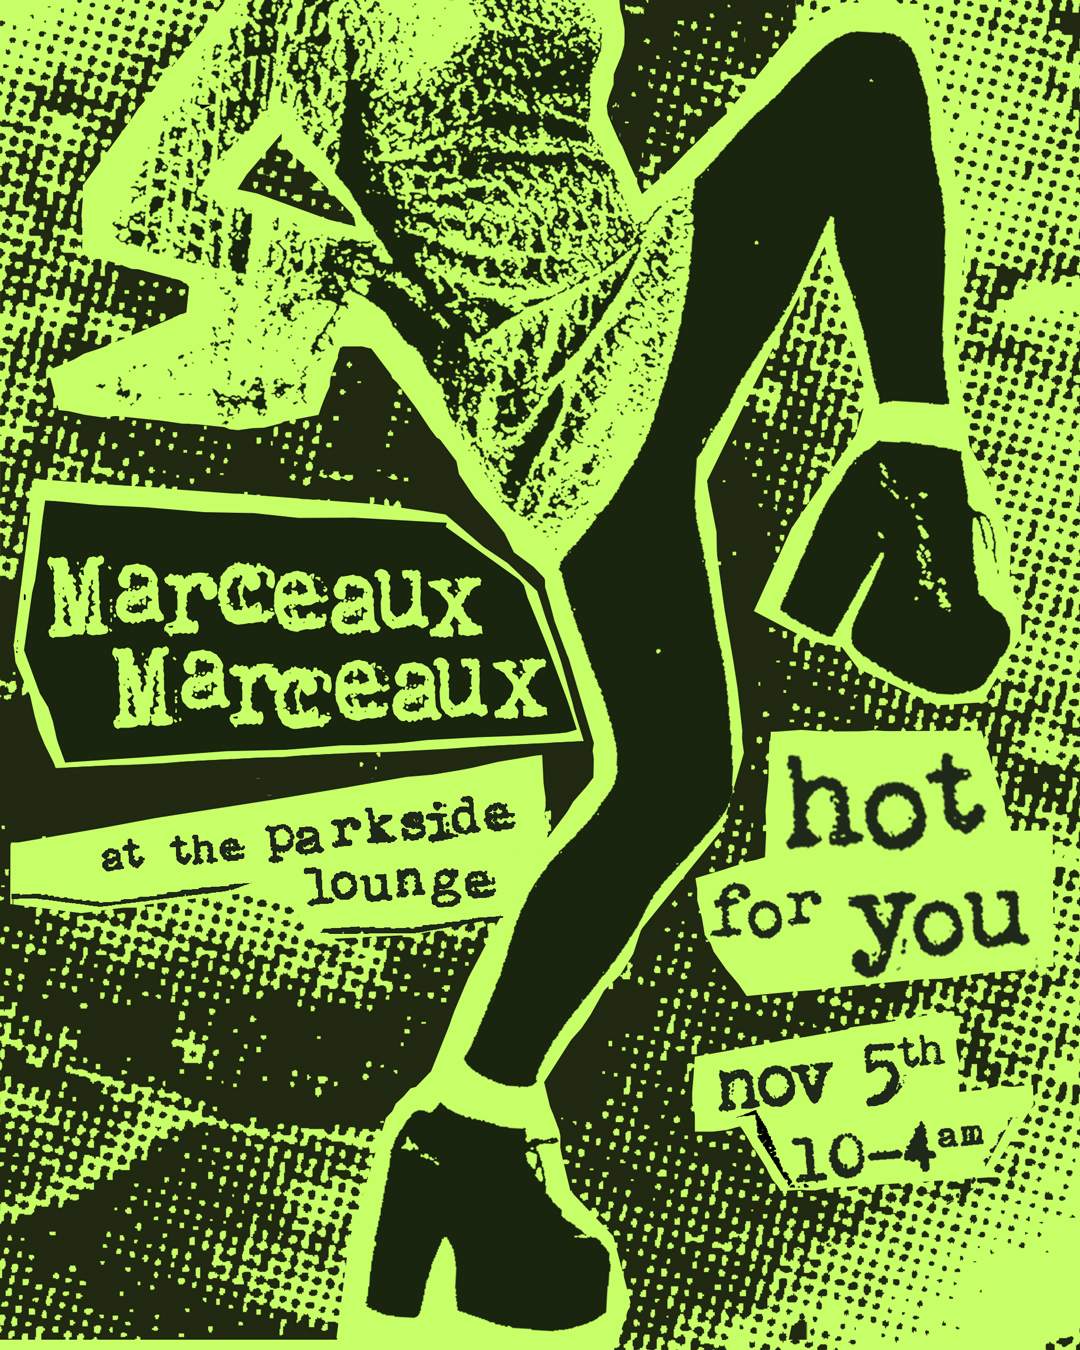 Hot For You with MarceauxMarceaux - Página frontal